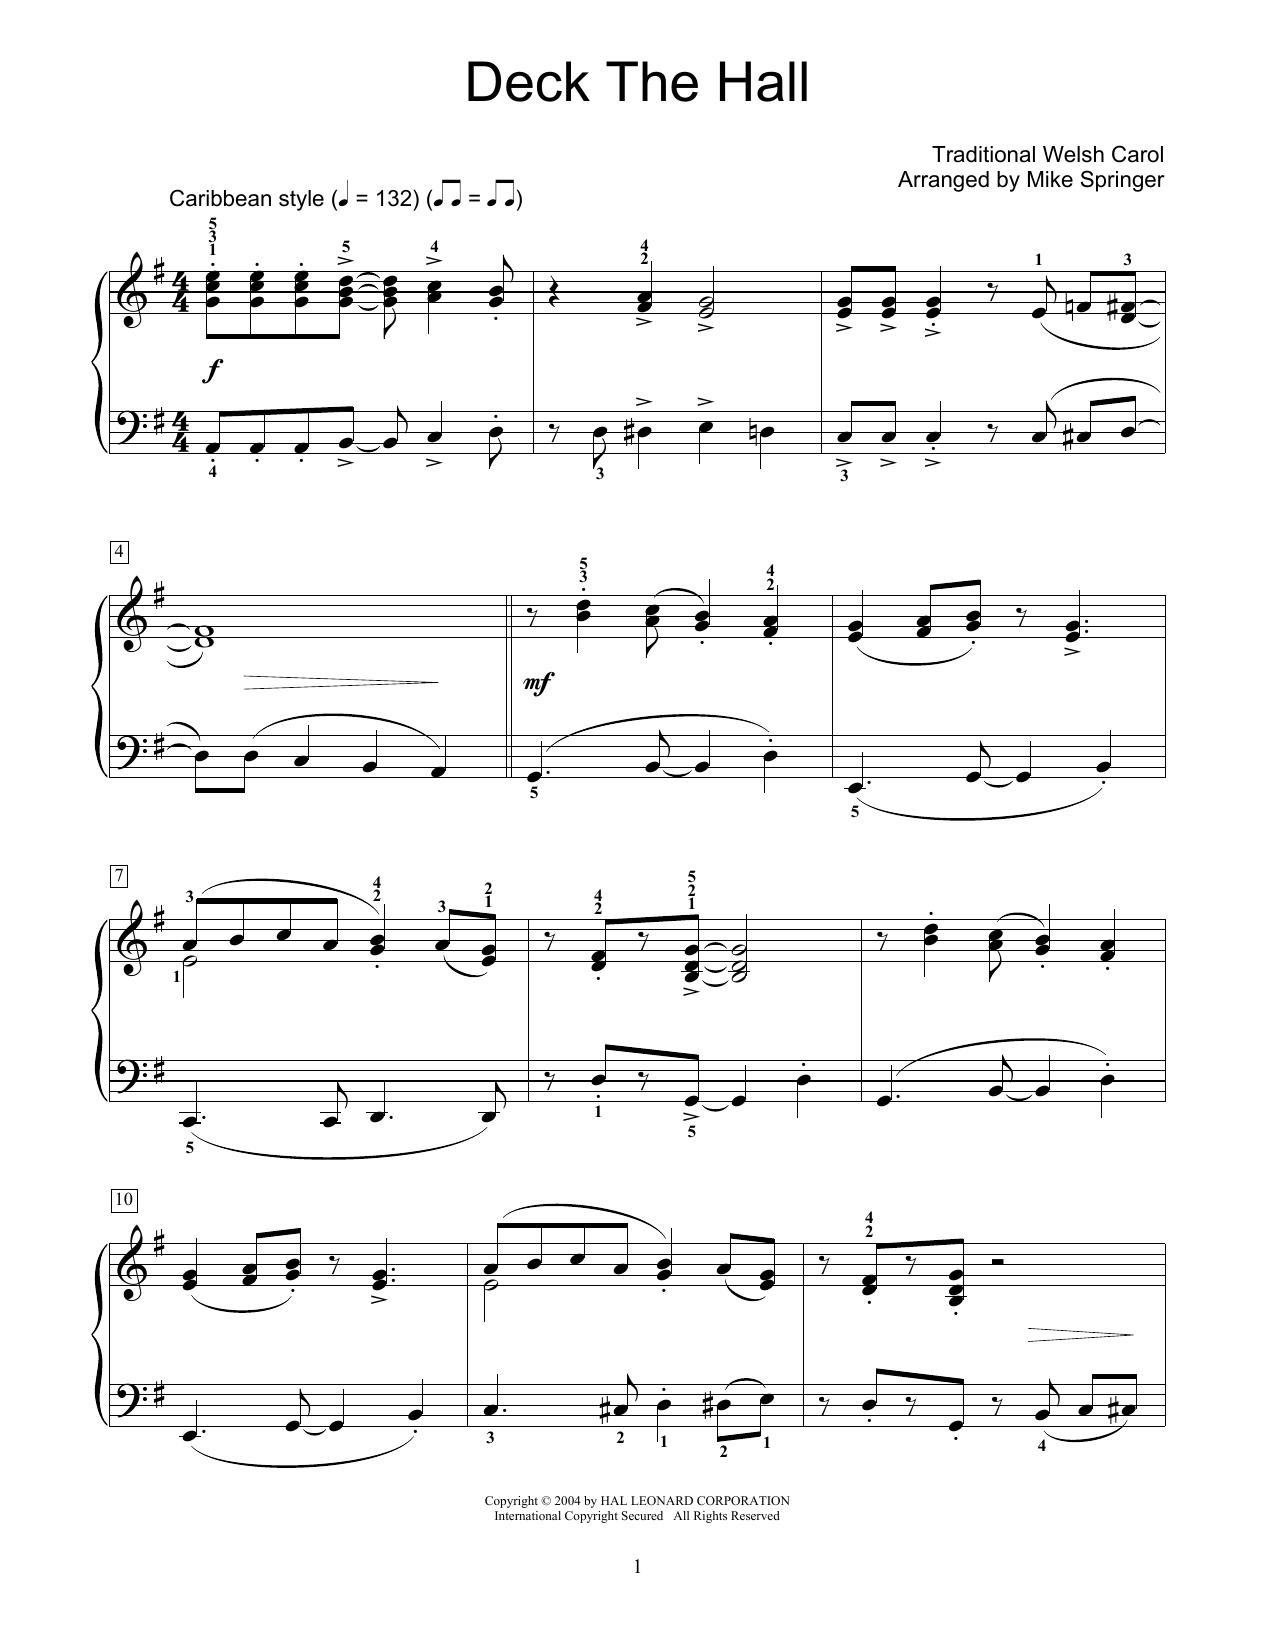 Download Traditional Welsh Carol Deck The Hall Sheet Music